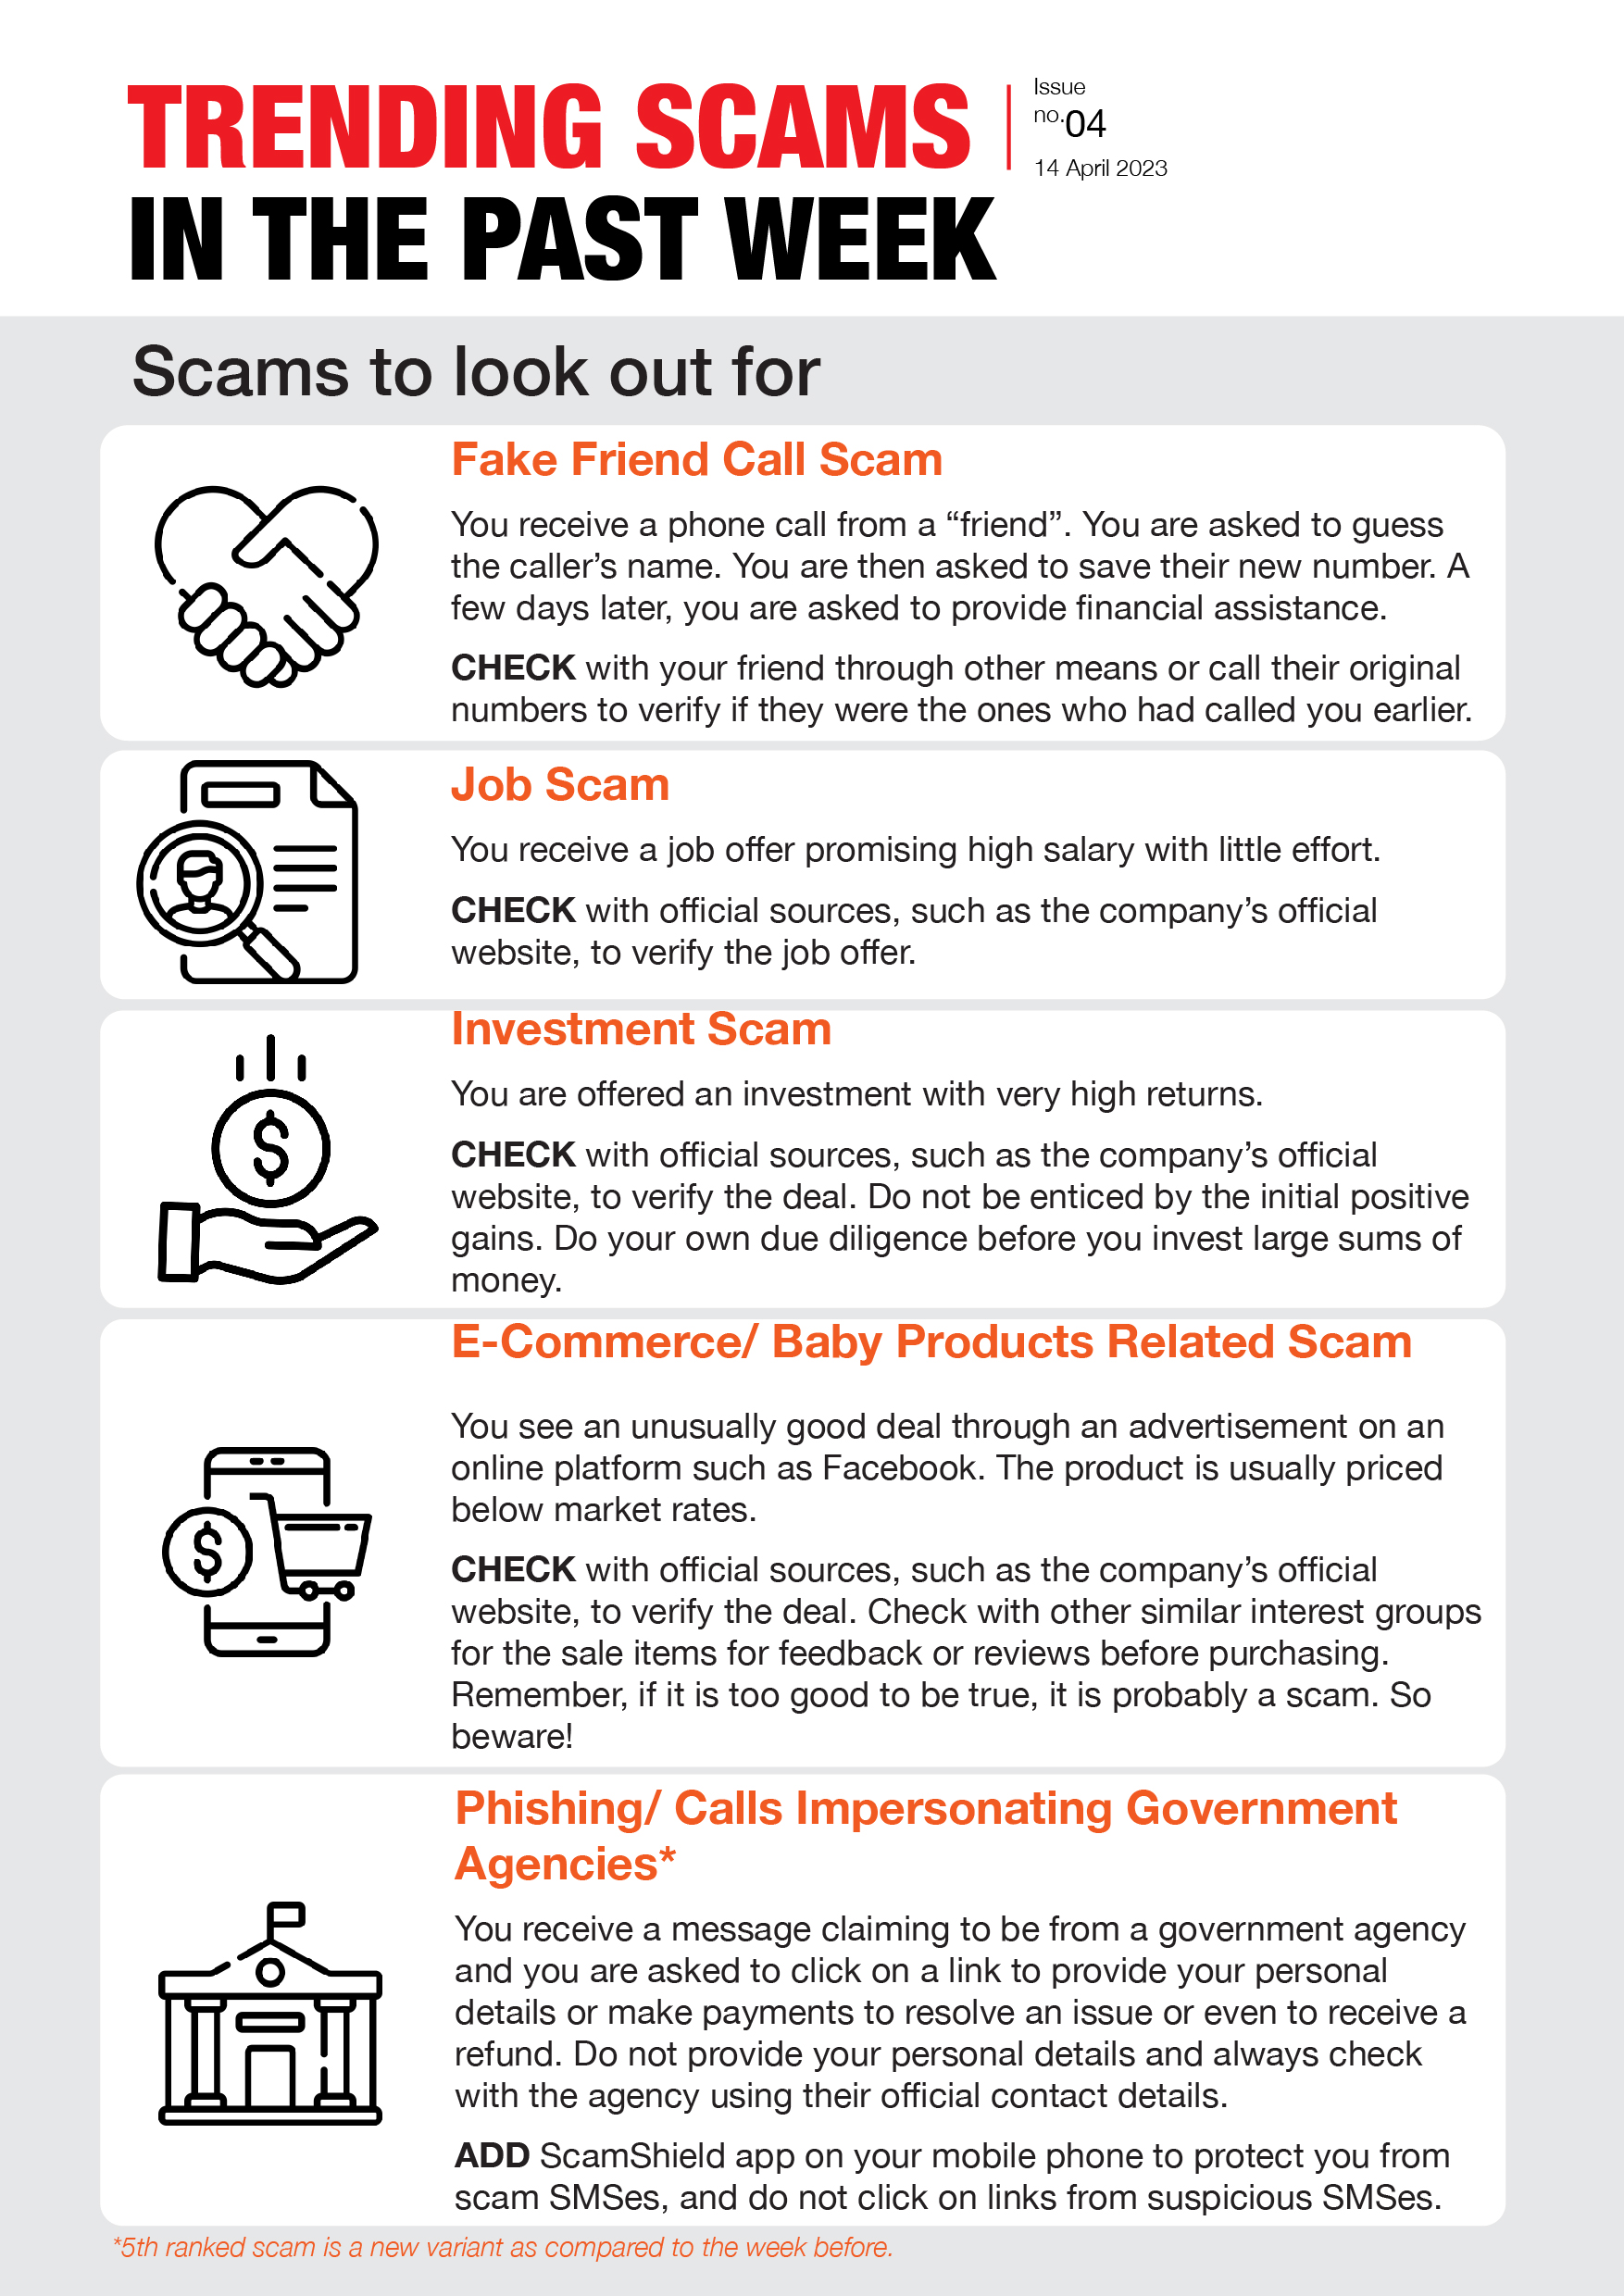 Weekly Bulletin Issue 4 - Scams to look out for